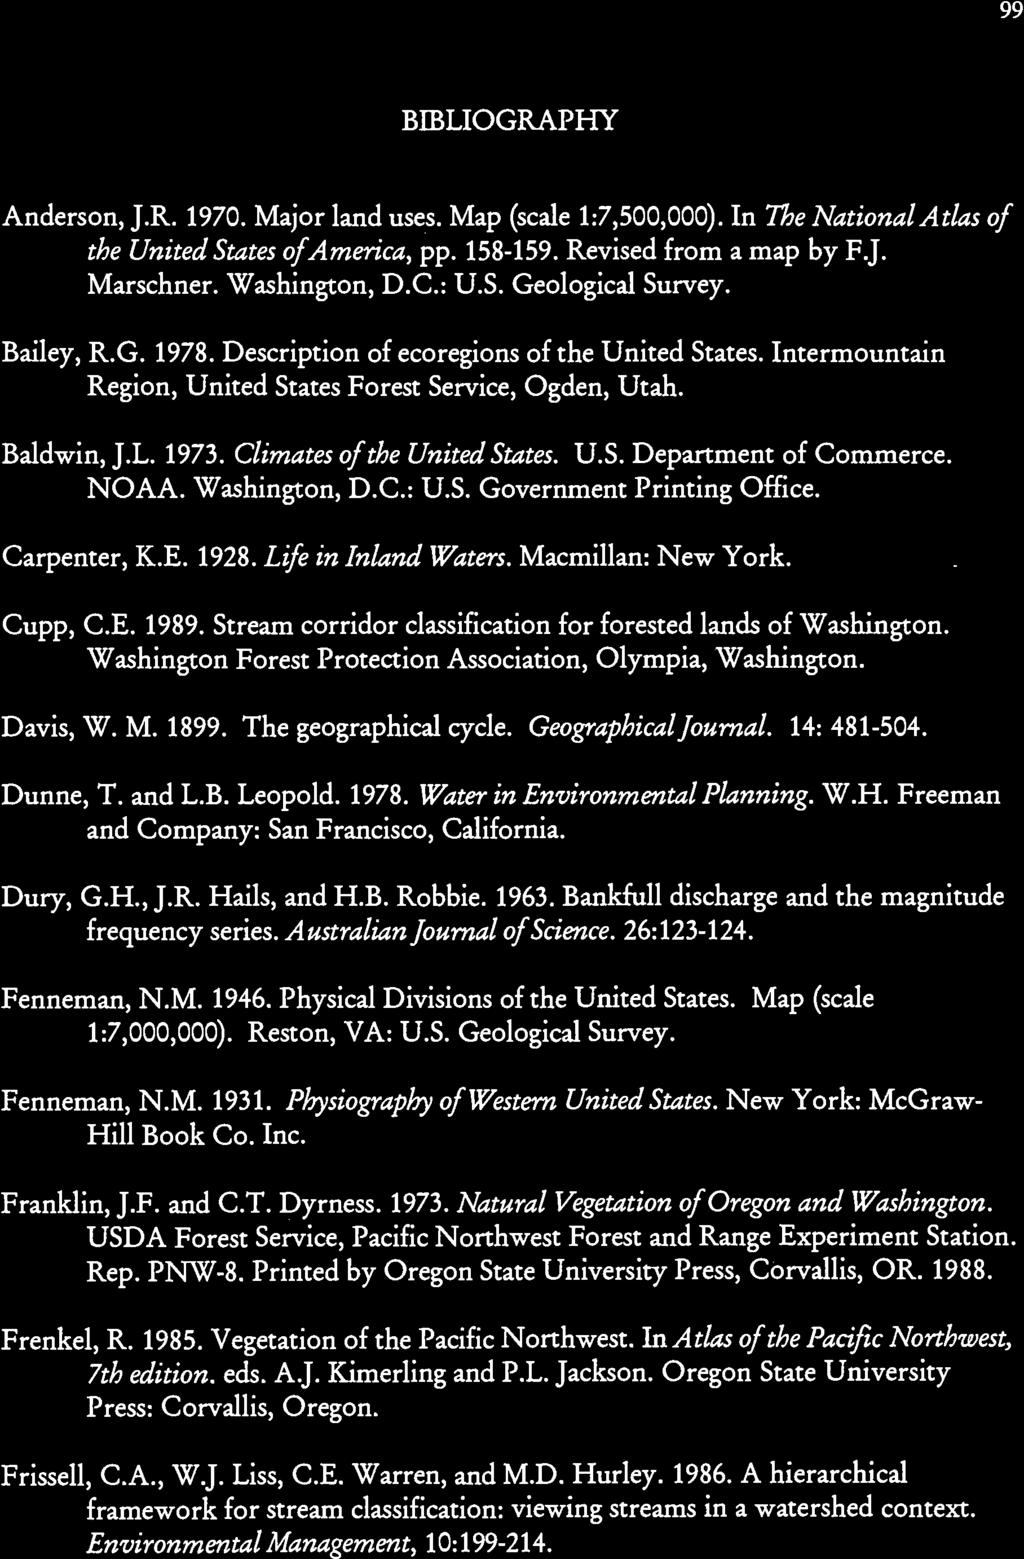 9 BIBLIOGRAPHY Anderson, J.R. 1970. Major land uses. Map (scale 1:7,500,000). In The National Atlas of the United States ofamerica, pp. 158-159. Revised from a map by F.J. Marschner. Washington, D.C.